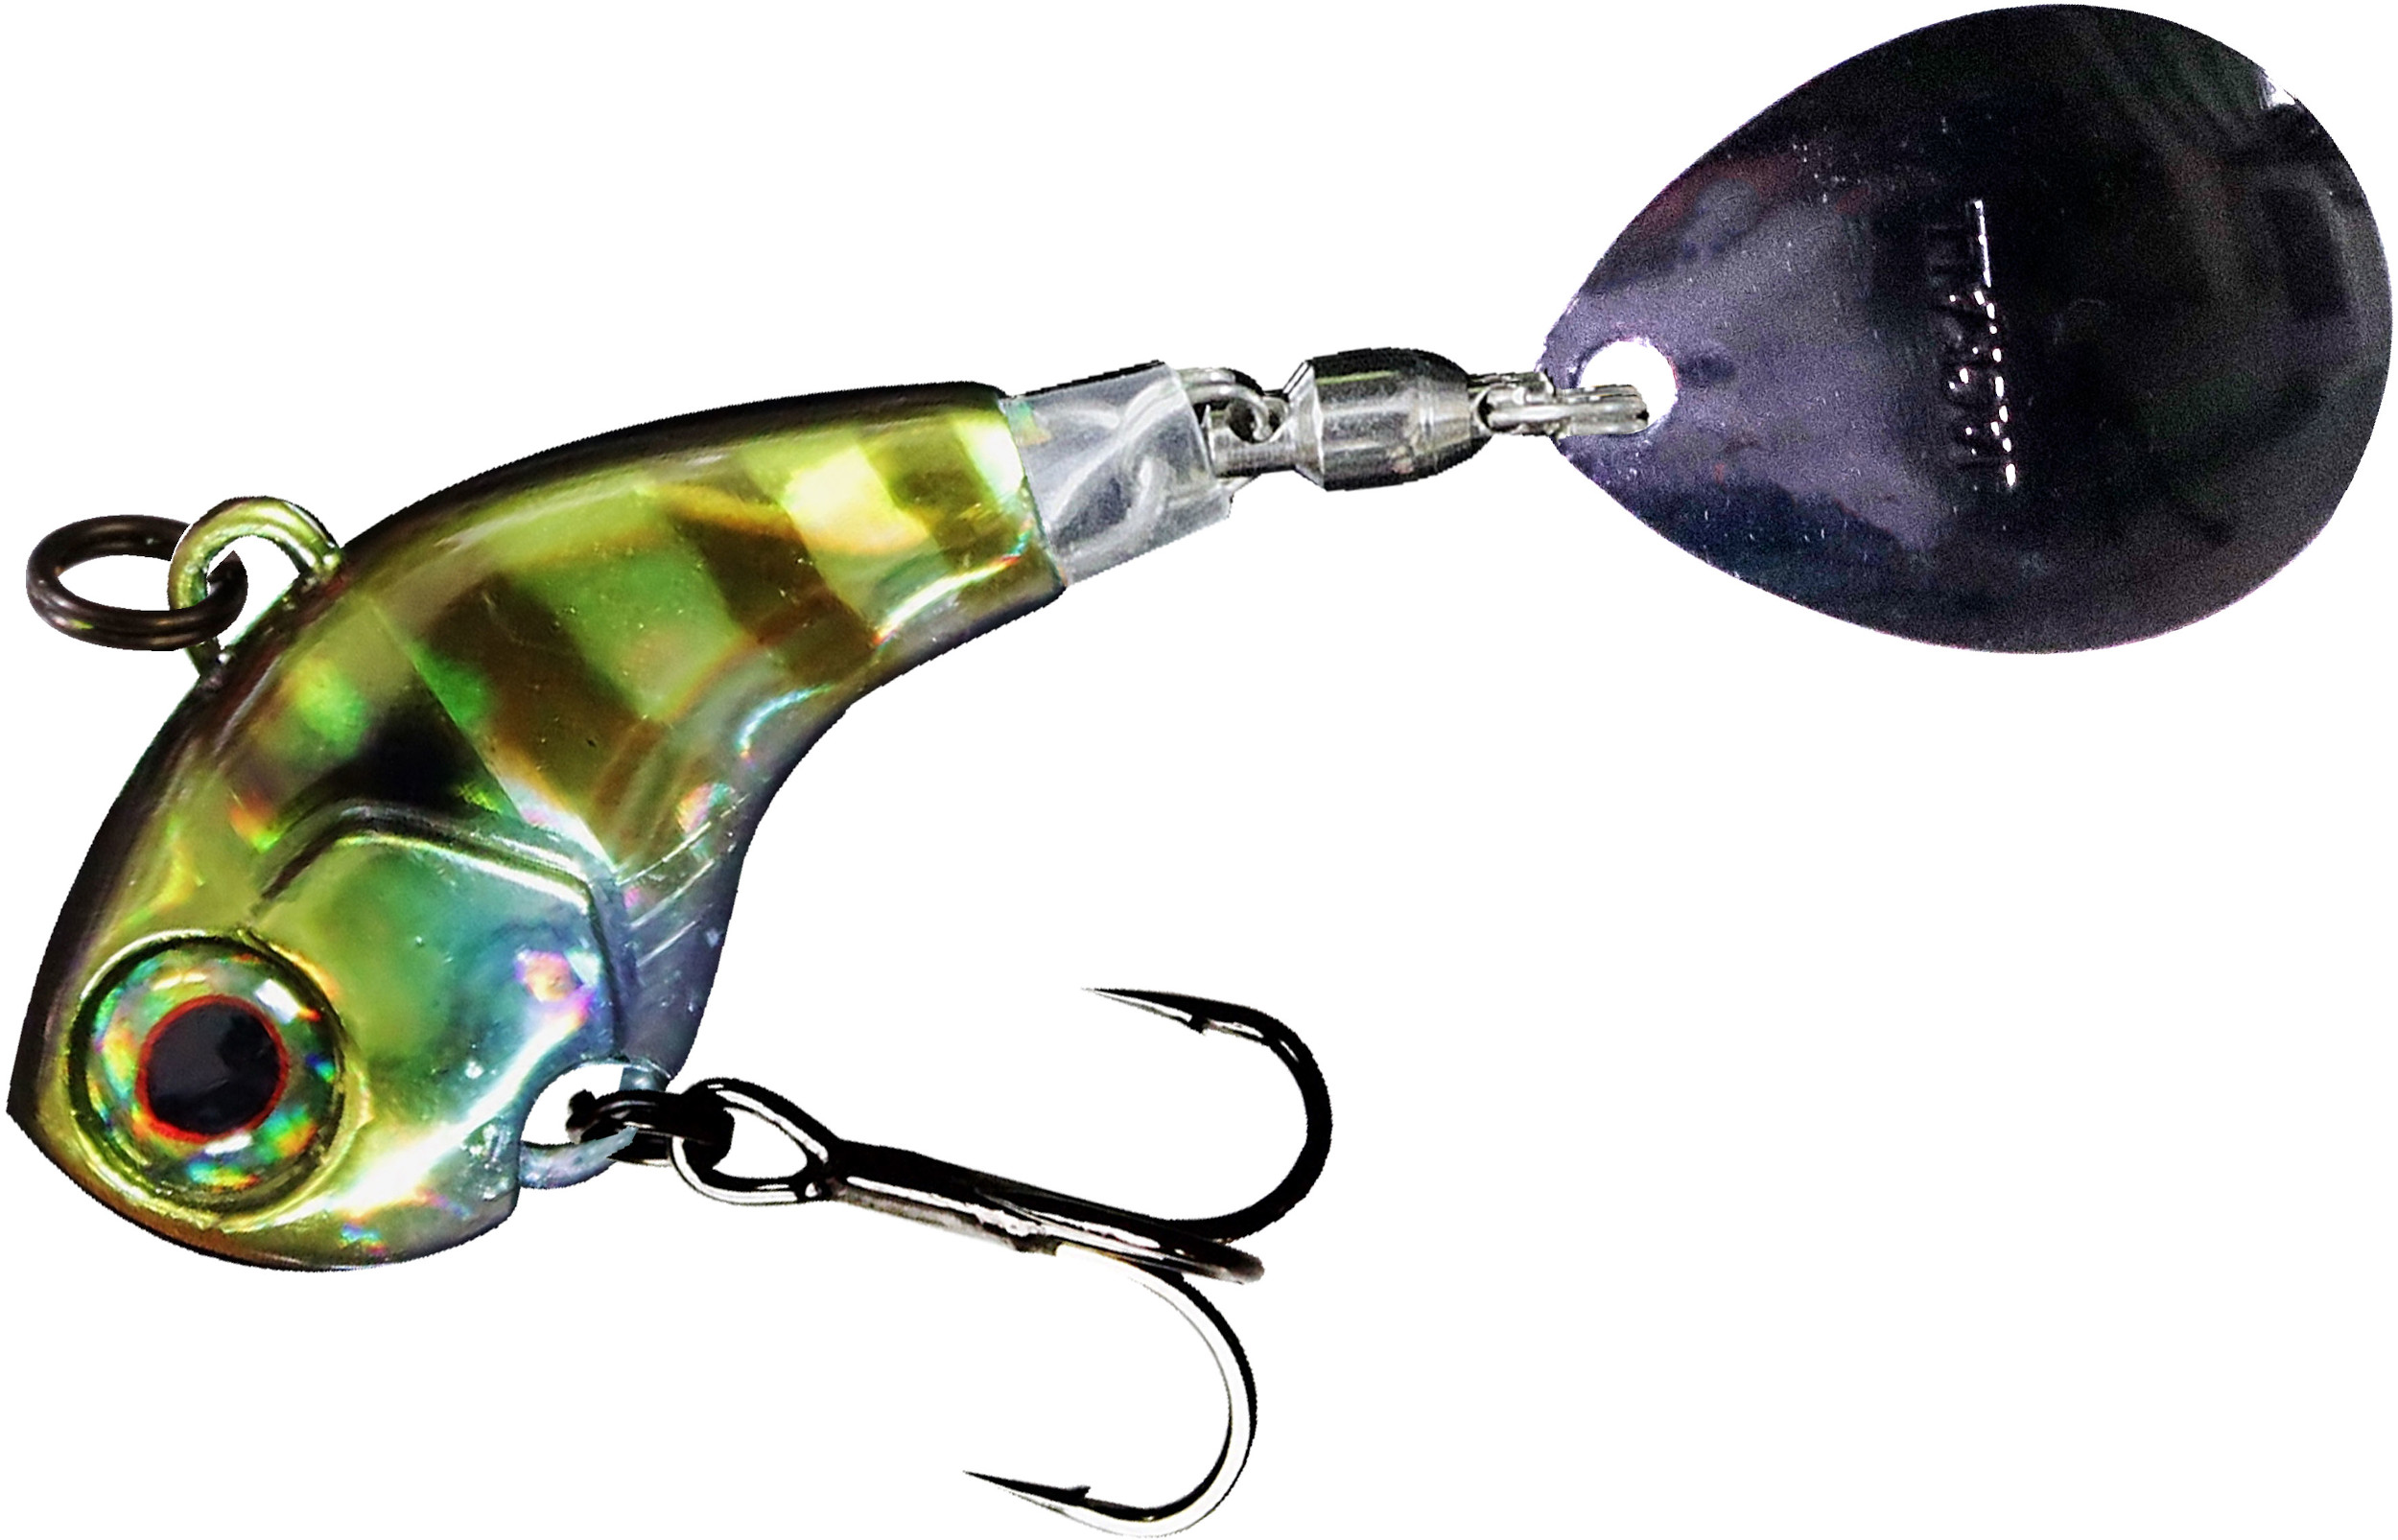 Jackall Deracoup Tail Spinner 1/2, 3/4, or 1 oz. Spin Tail Jigging Lure